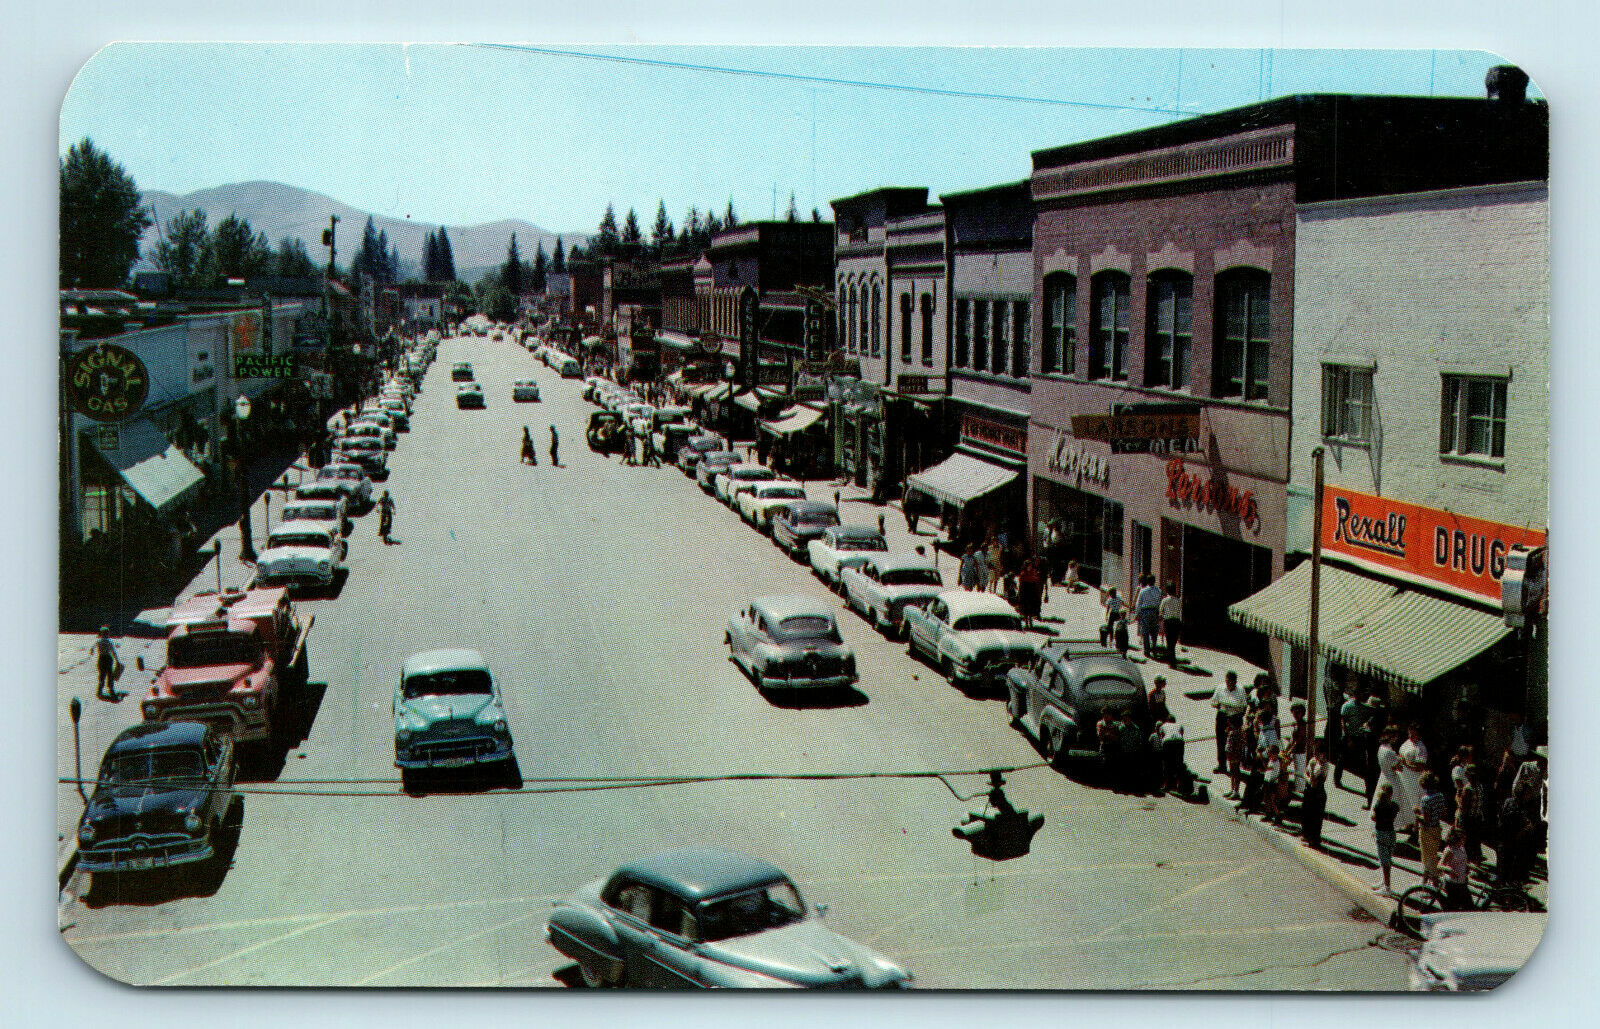 Sandpoint, Id   Street Scene Old Cars Signs Storefronts   Postcard